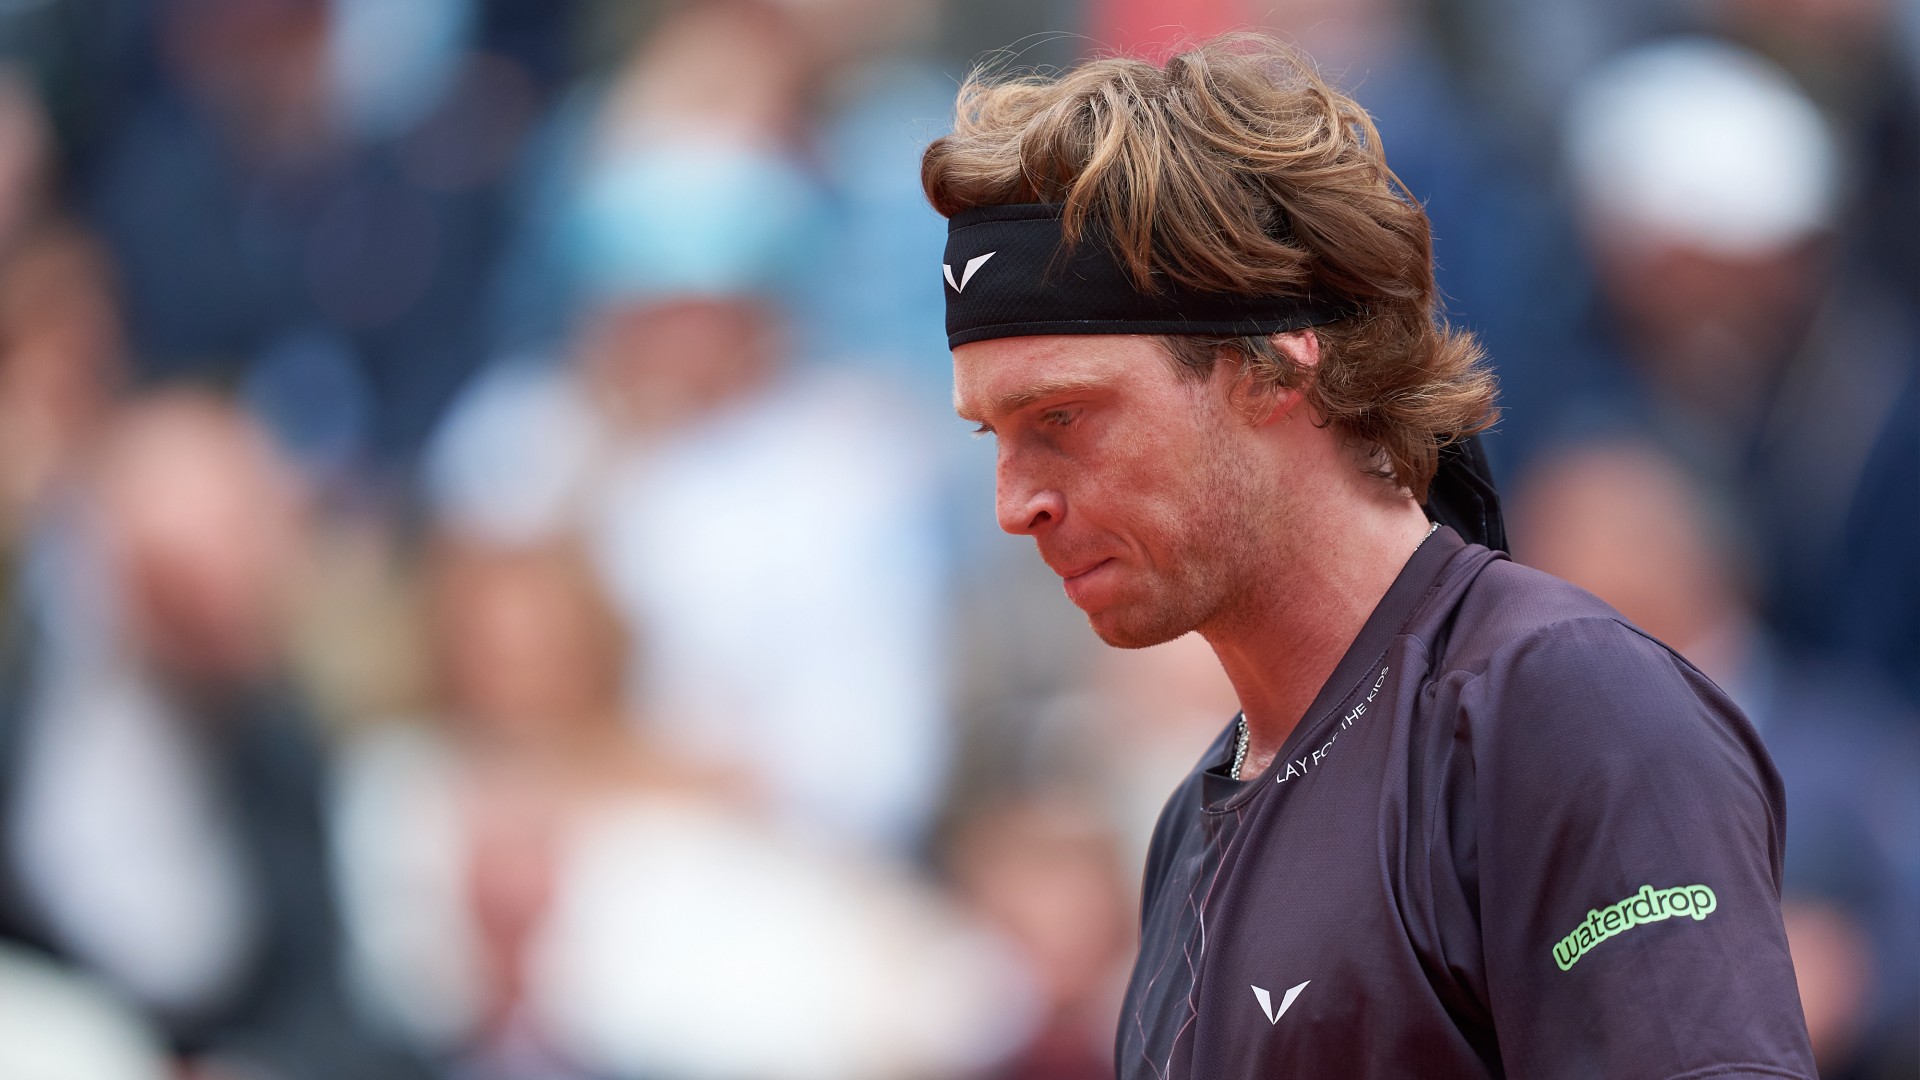 Rublev knocked out of French Open